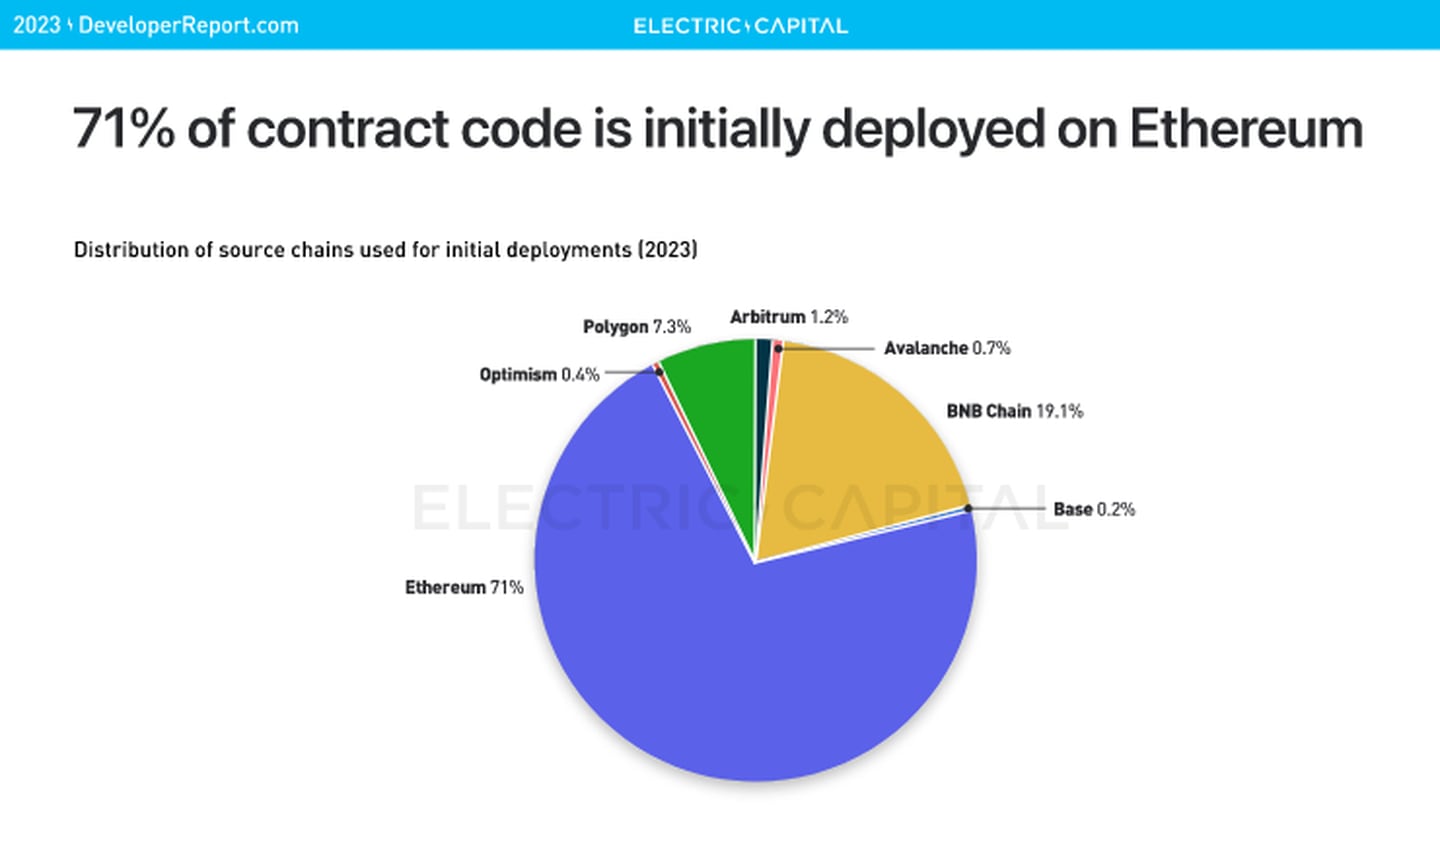 The majority of smart contract codes are deployed on Ethereum